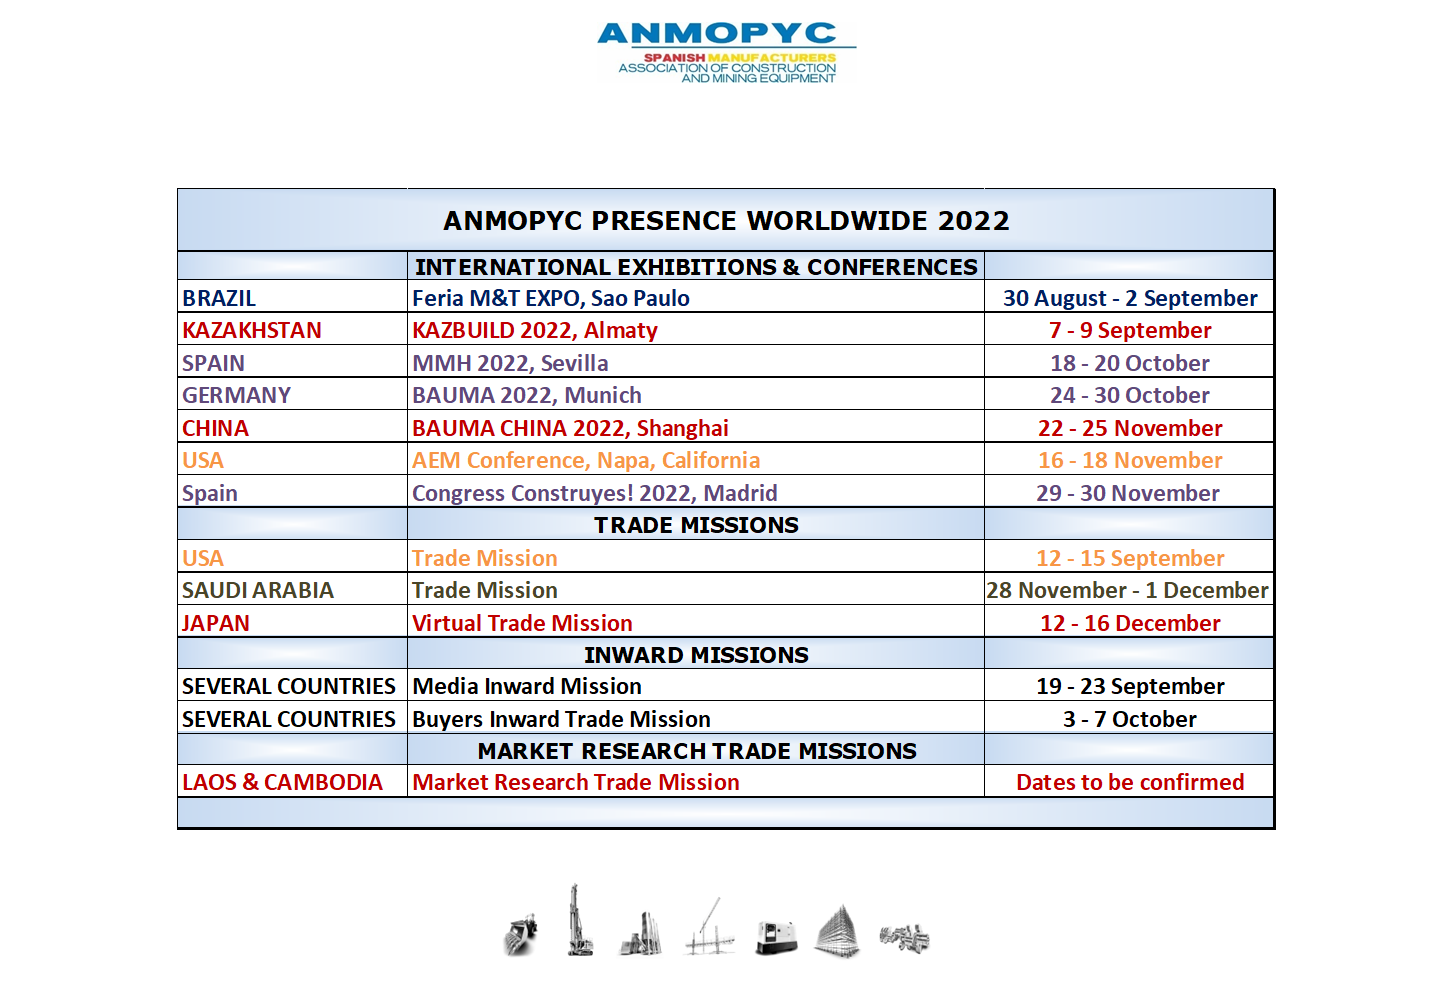 Anmopyc activities plan for the second half of the year